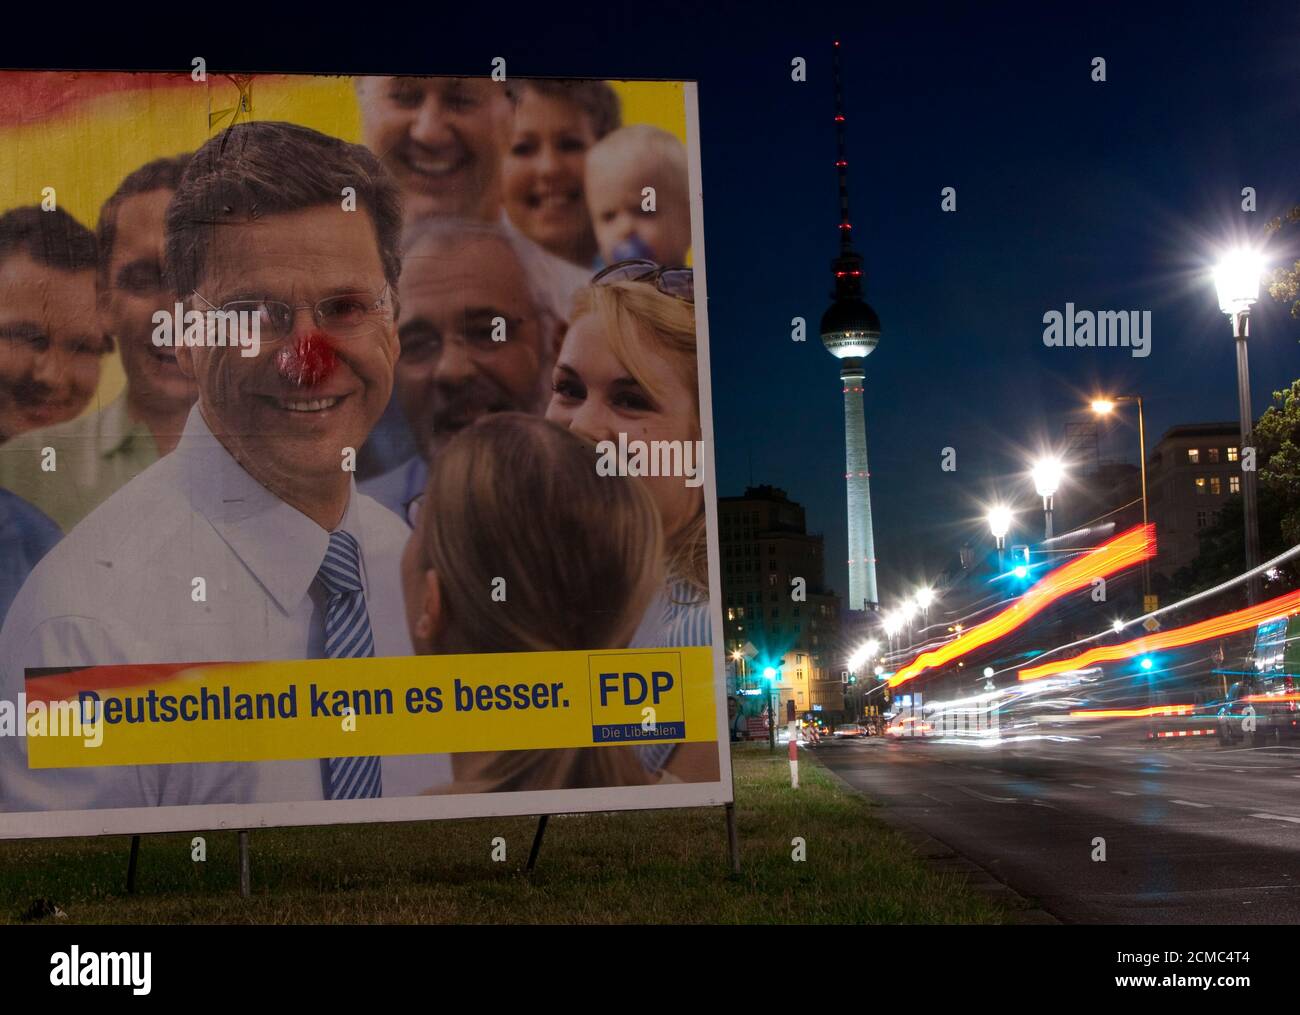 An election poster of the liberal FDP party shows its party leader Guido Westerwelle near the Fernsehturm television tower in Berlin  August 31, 2009.   REUTERS/Thomas Peter  (GERMANY POLITICS ELECTIONS) Stock Photo